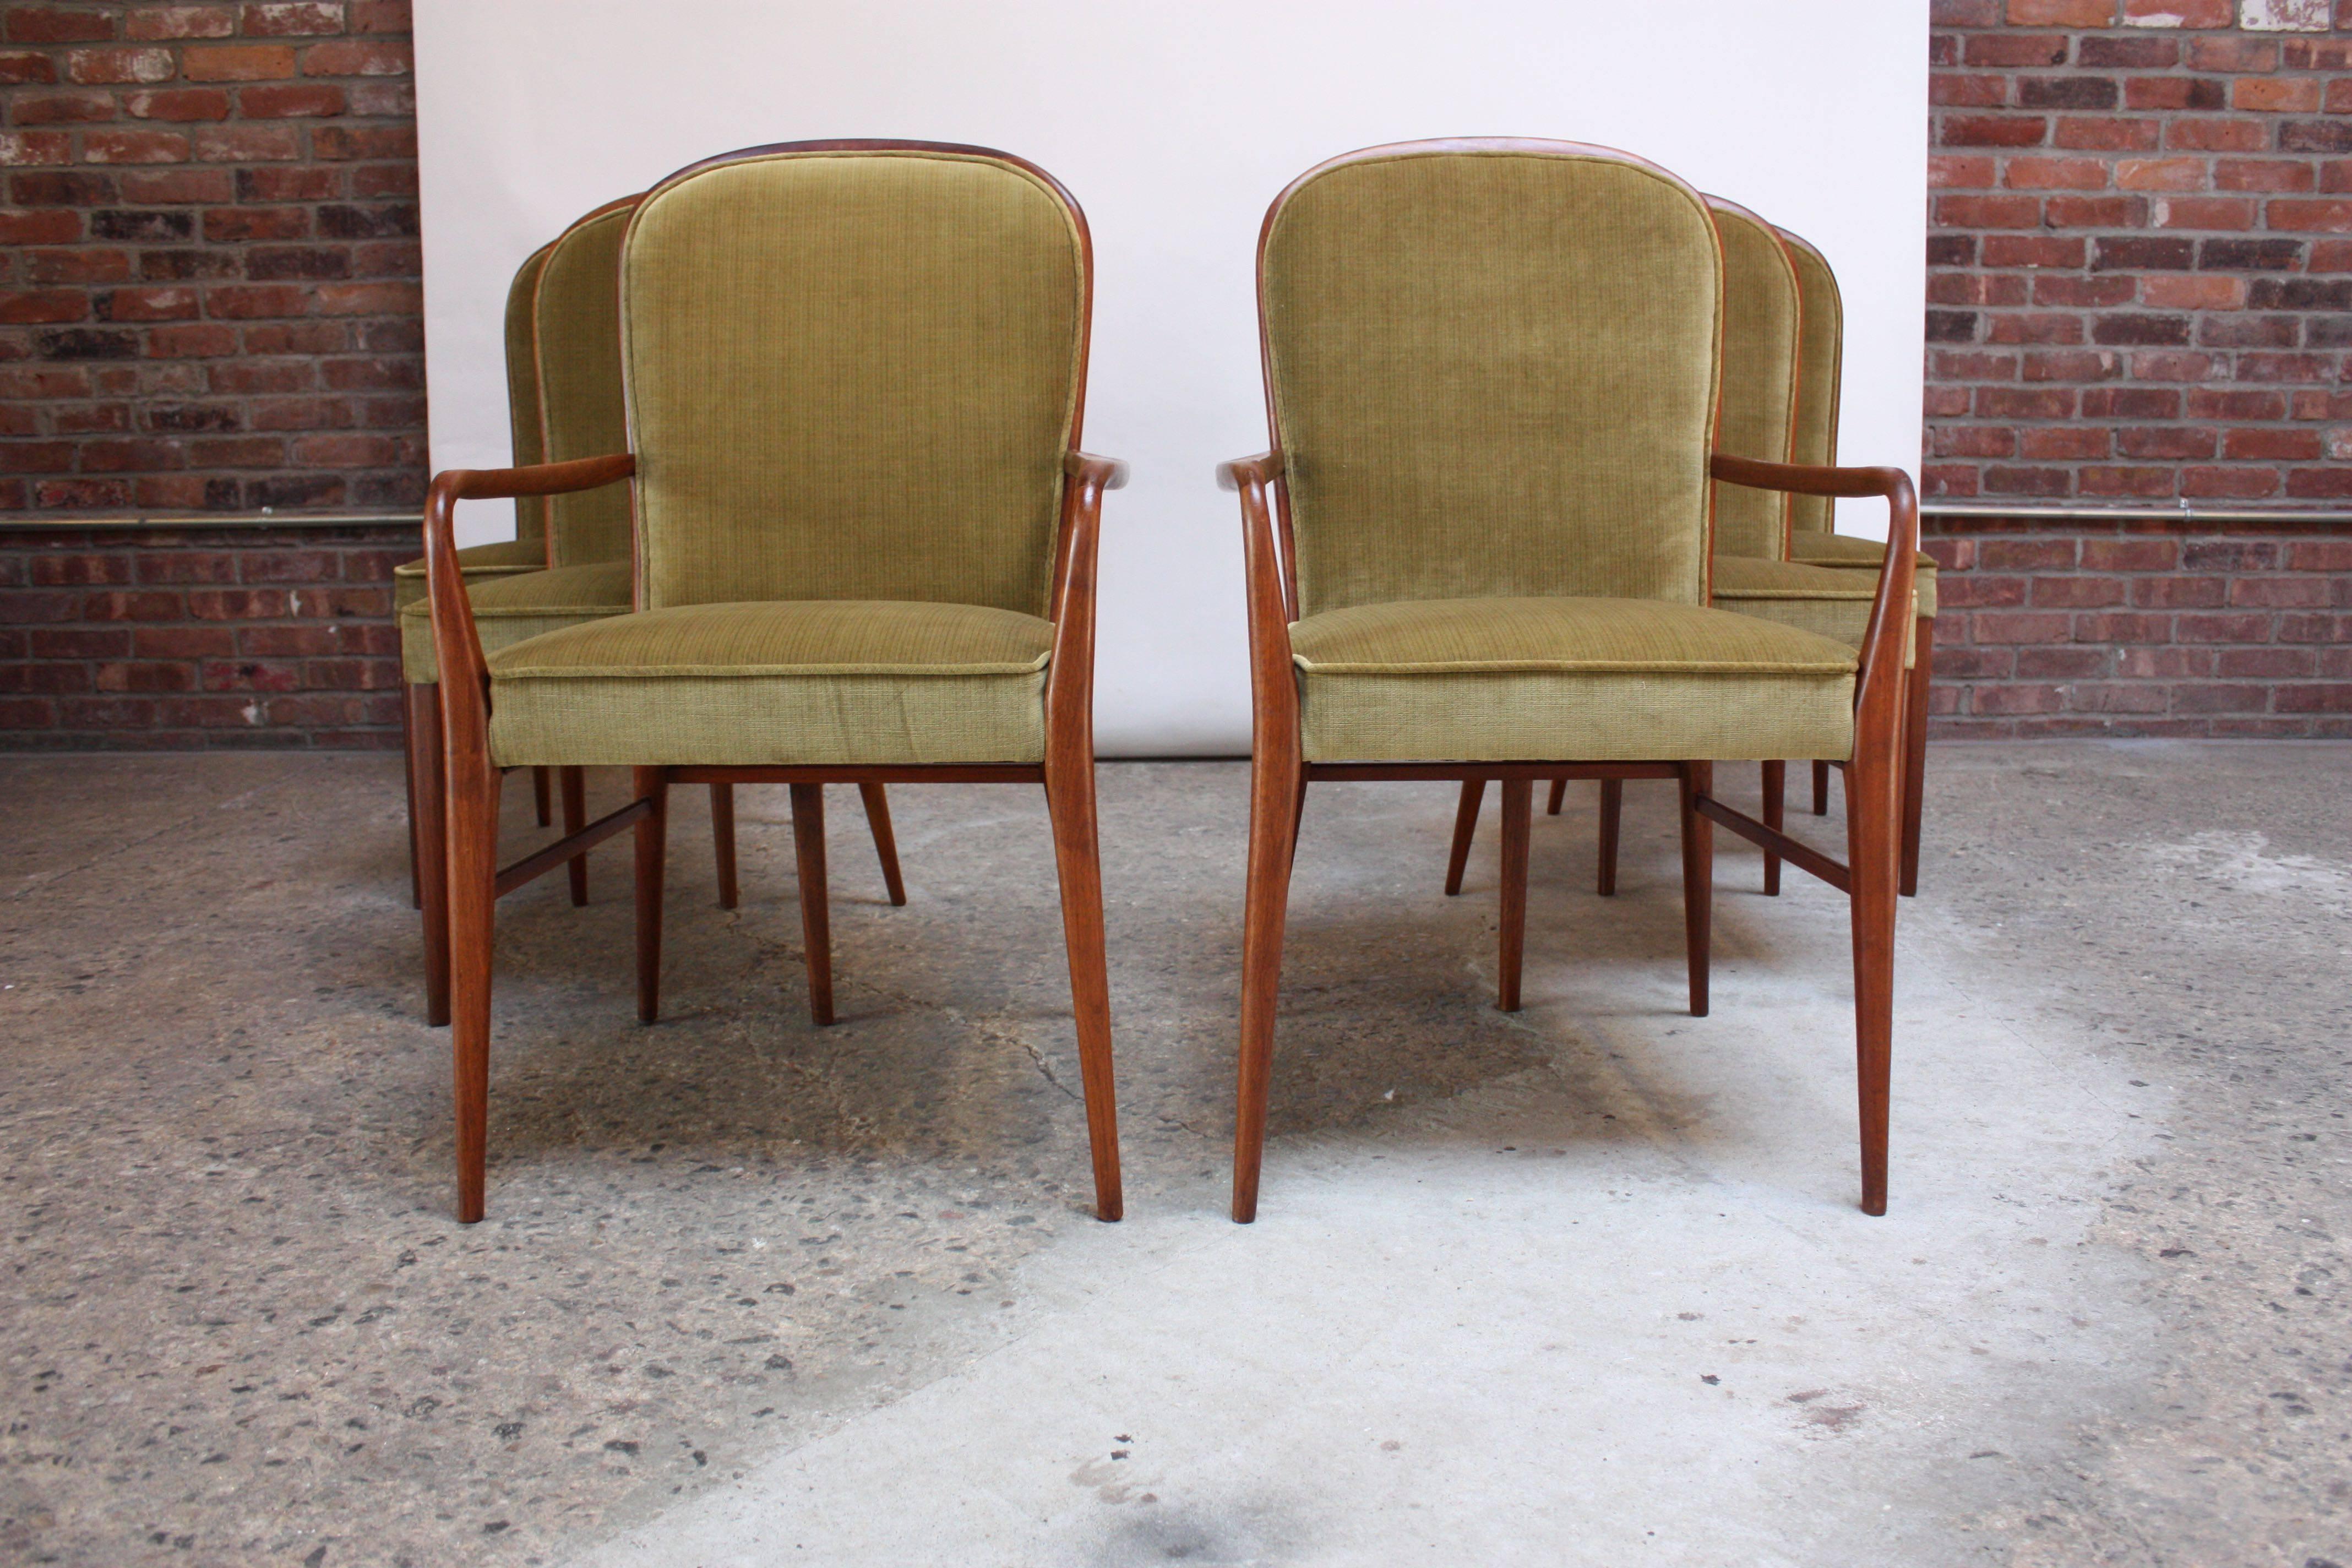 Rare set of Paul McCobb for H Sacks & Sons dining chairs (two captains and four side) composed of hand-carved walnut frames with sage velvet upholstery (front and back) in place of the original caned back. Set boasts dramatic lines with the sculpted